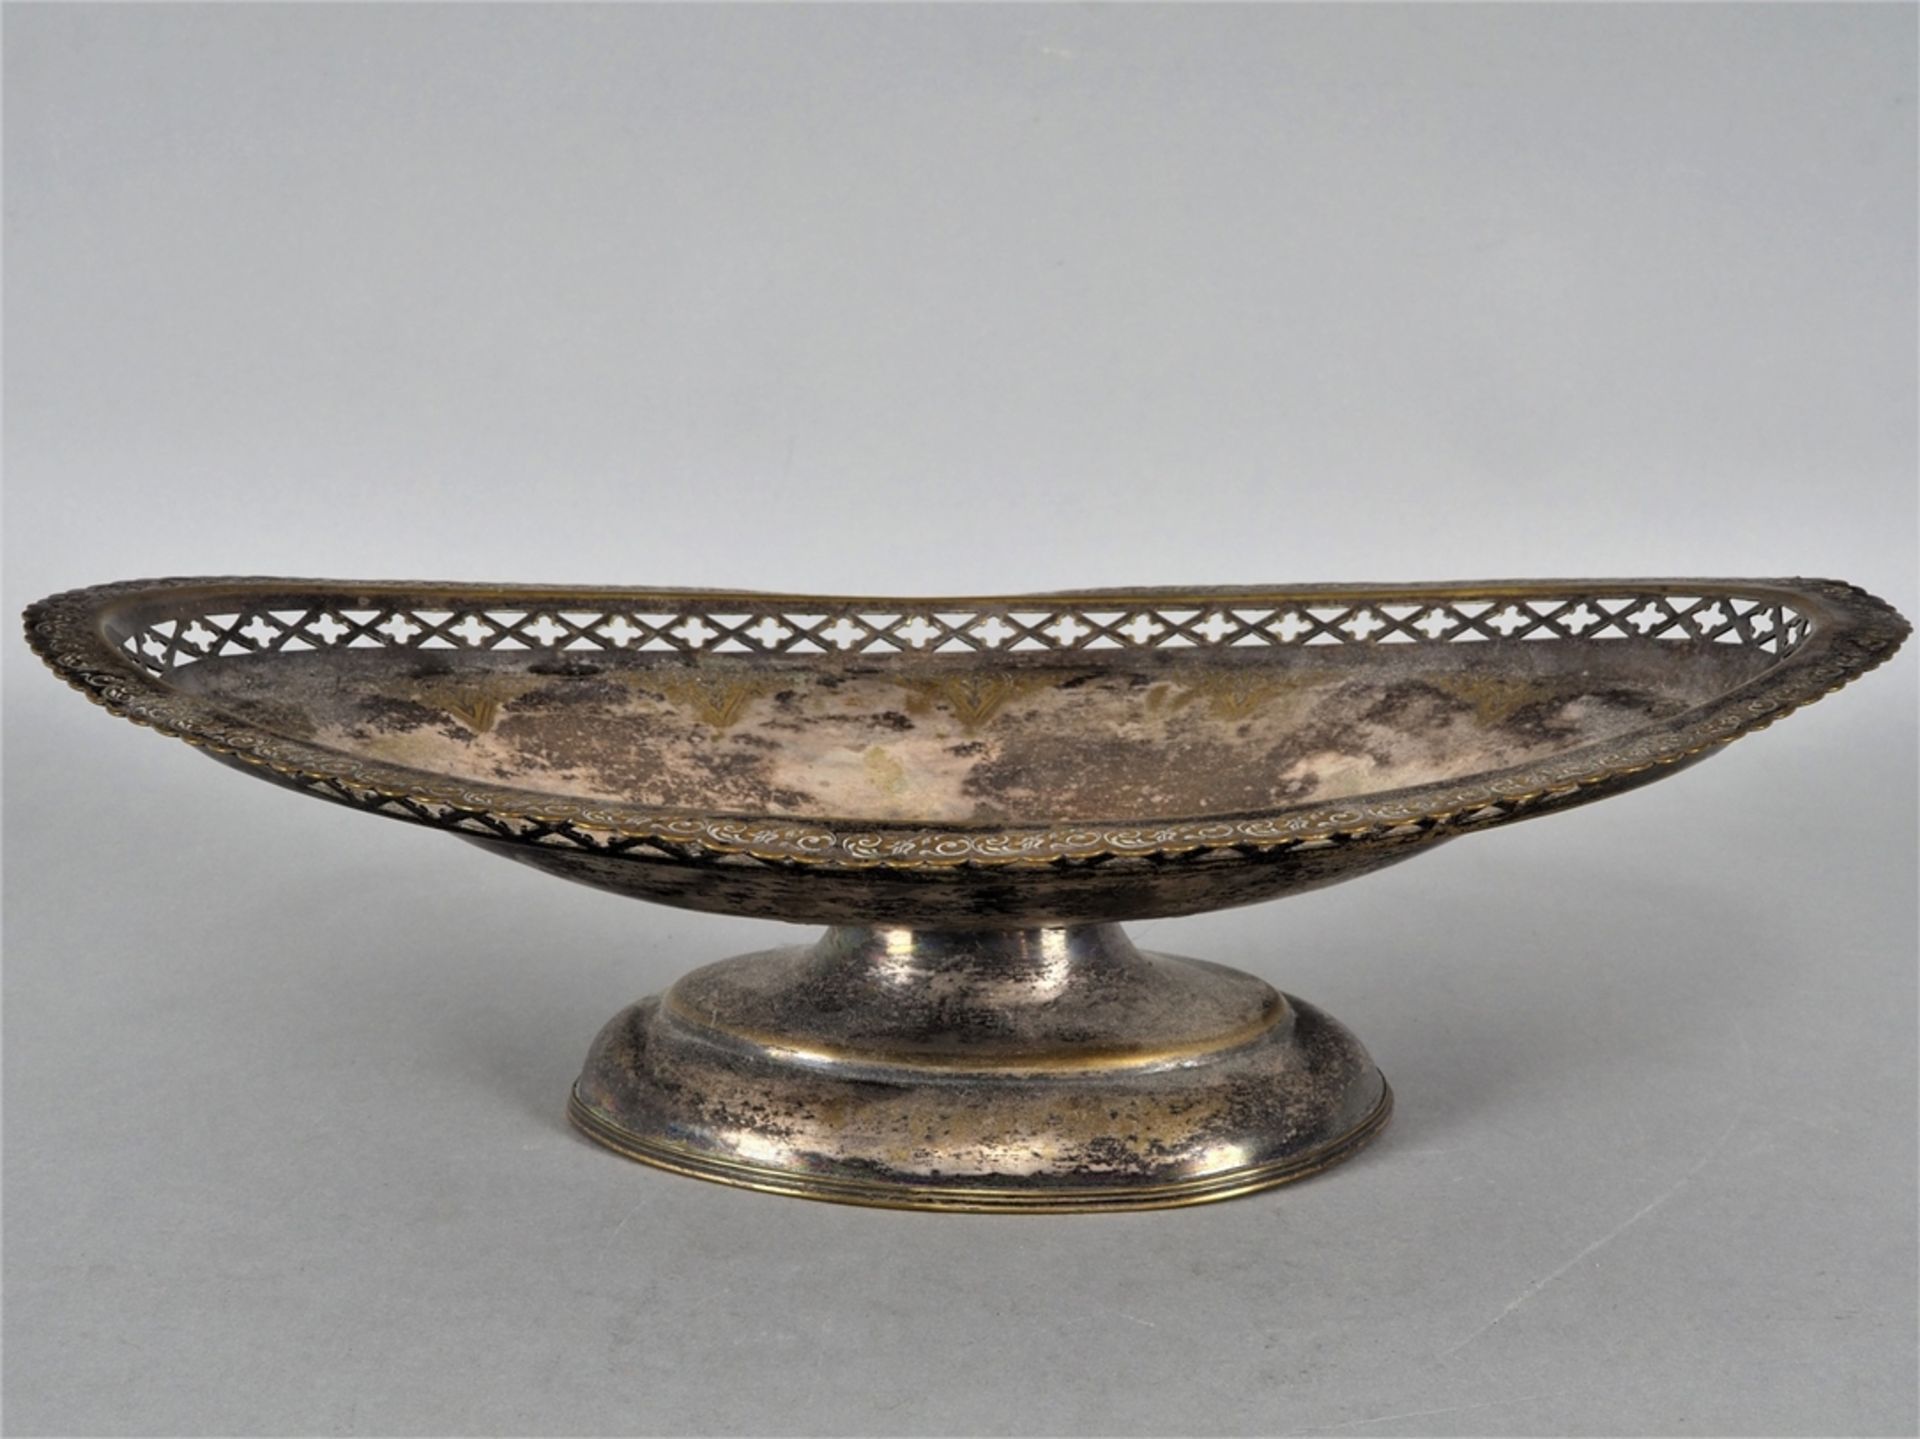 Fruit bowl, end of the 19th century.